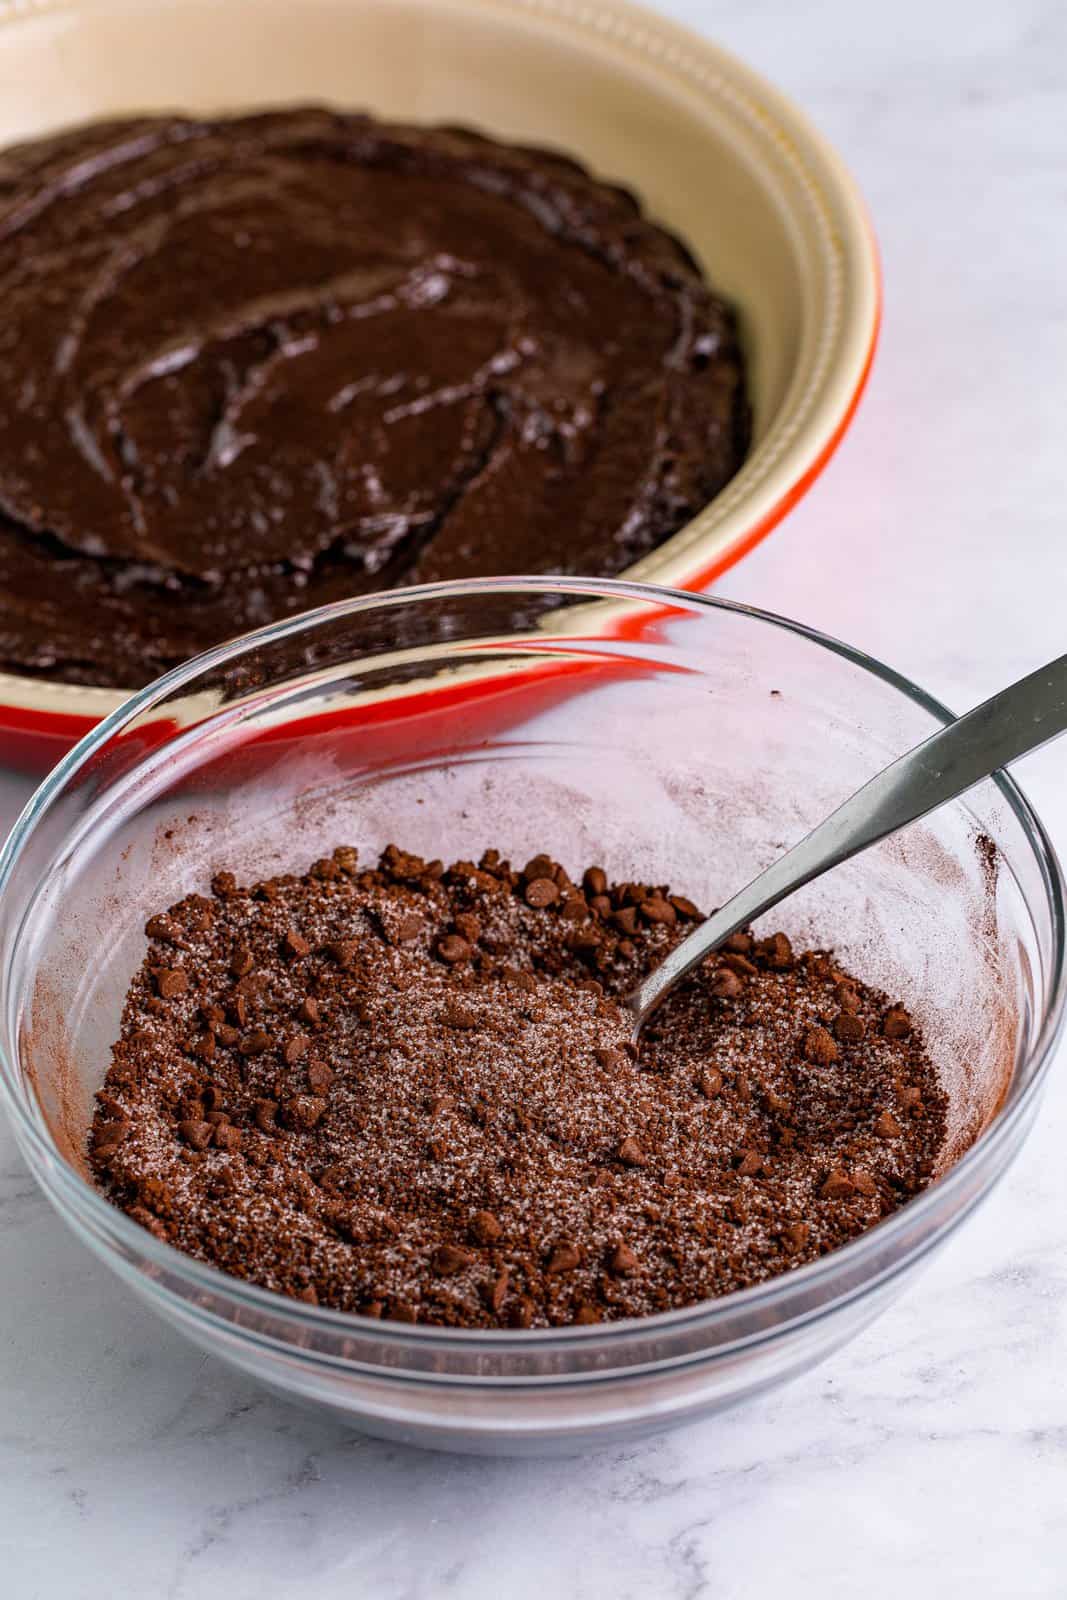 Sugar, brown sugar, cocoa powder, and chocolate chips stirred together in bowl.